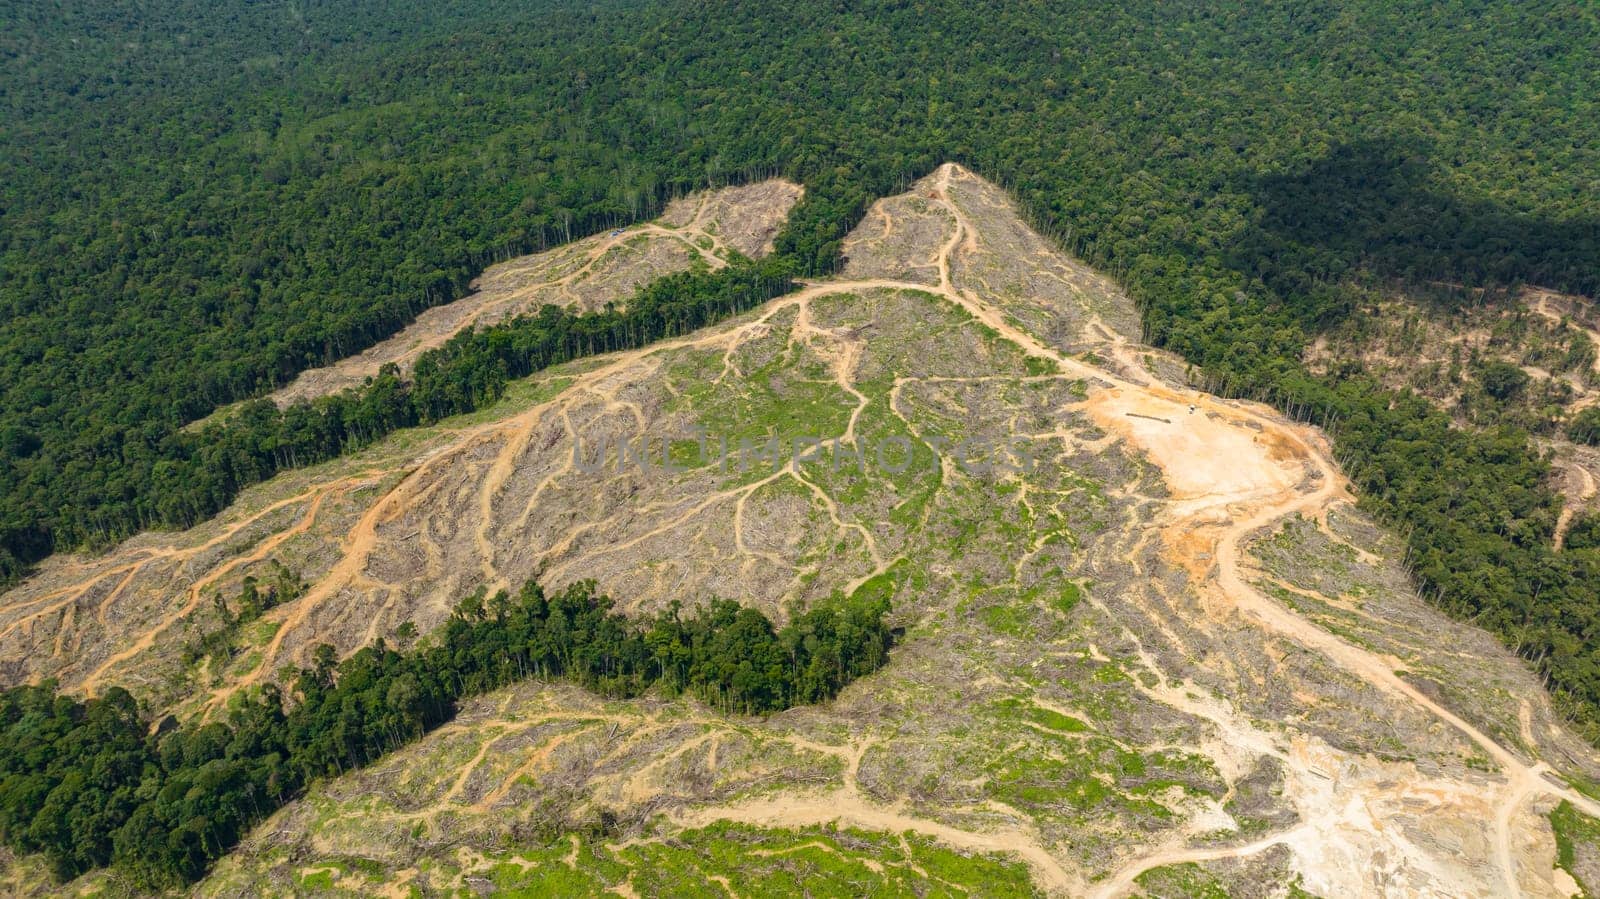 Top view of rainforest cutting down to make way for oil palm plantations. Deforestation. Jungle forest environmental destruction. Borneo, Malaysia.